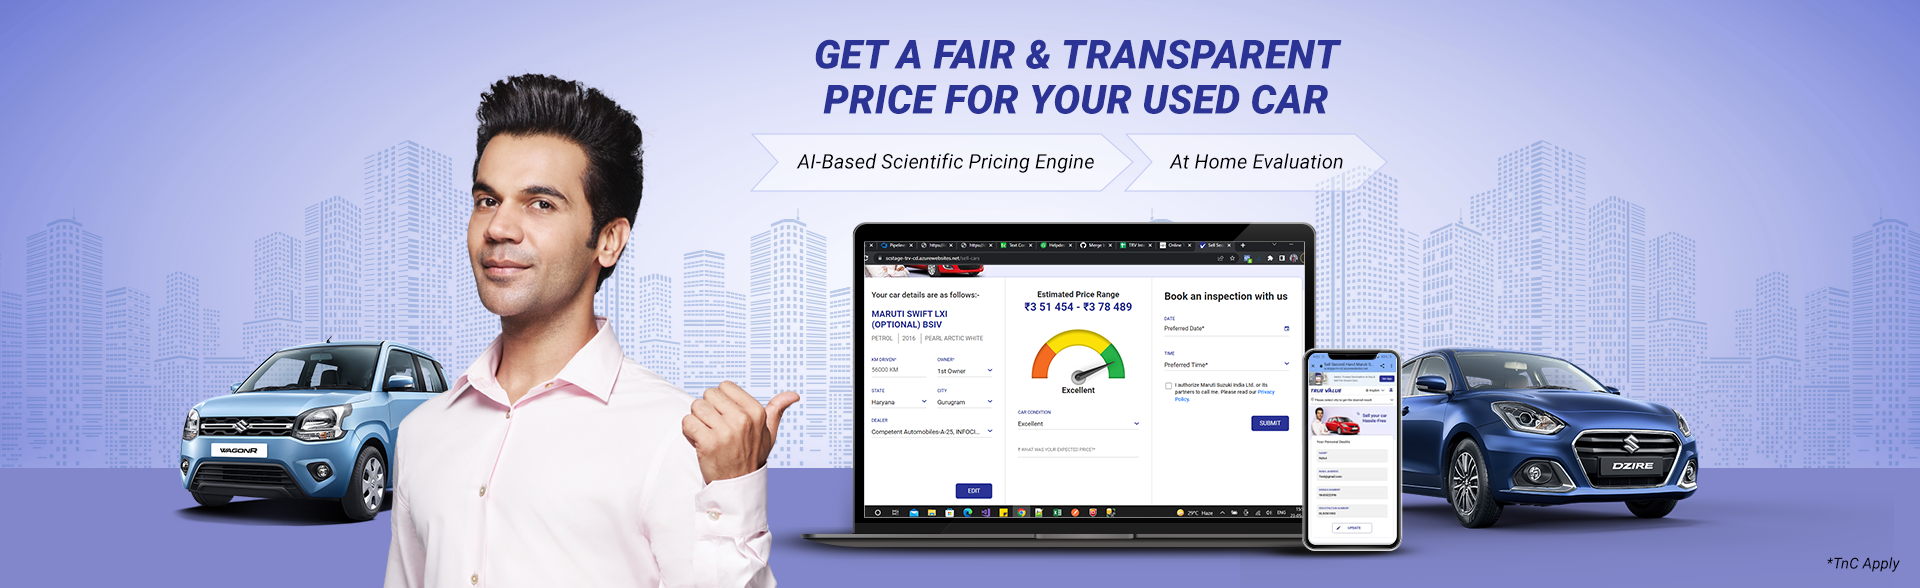 GET A FAIR AND TRANSPARENT PRICE FOR YOUR USED CAR